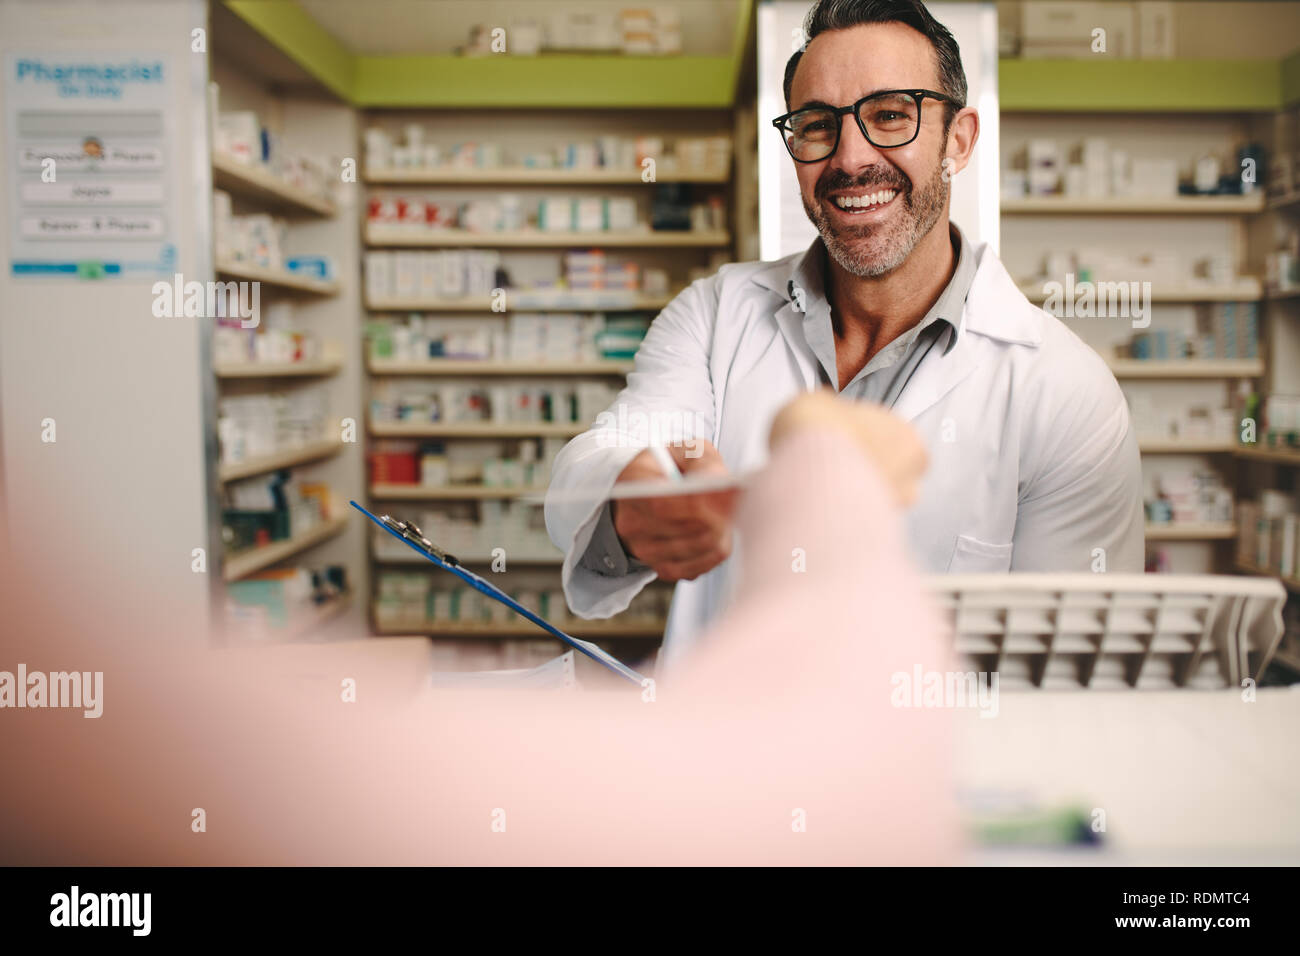 Male apothecary taking prescription from customer at pharmacy. Customer handing a medical prescription to the chemist standing behind counter. Stock Photo